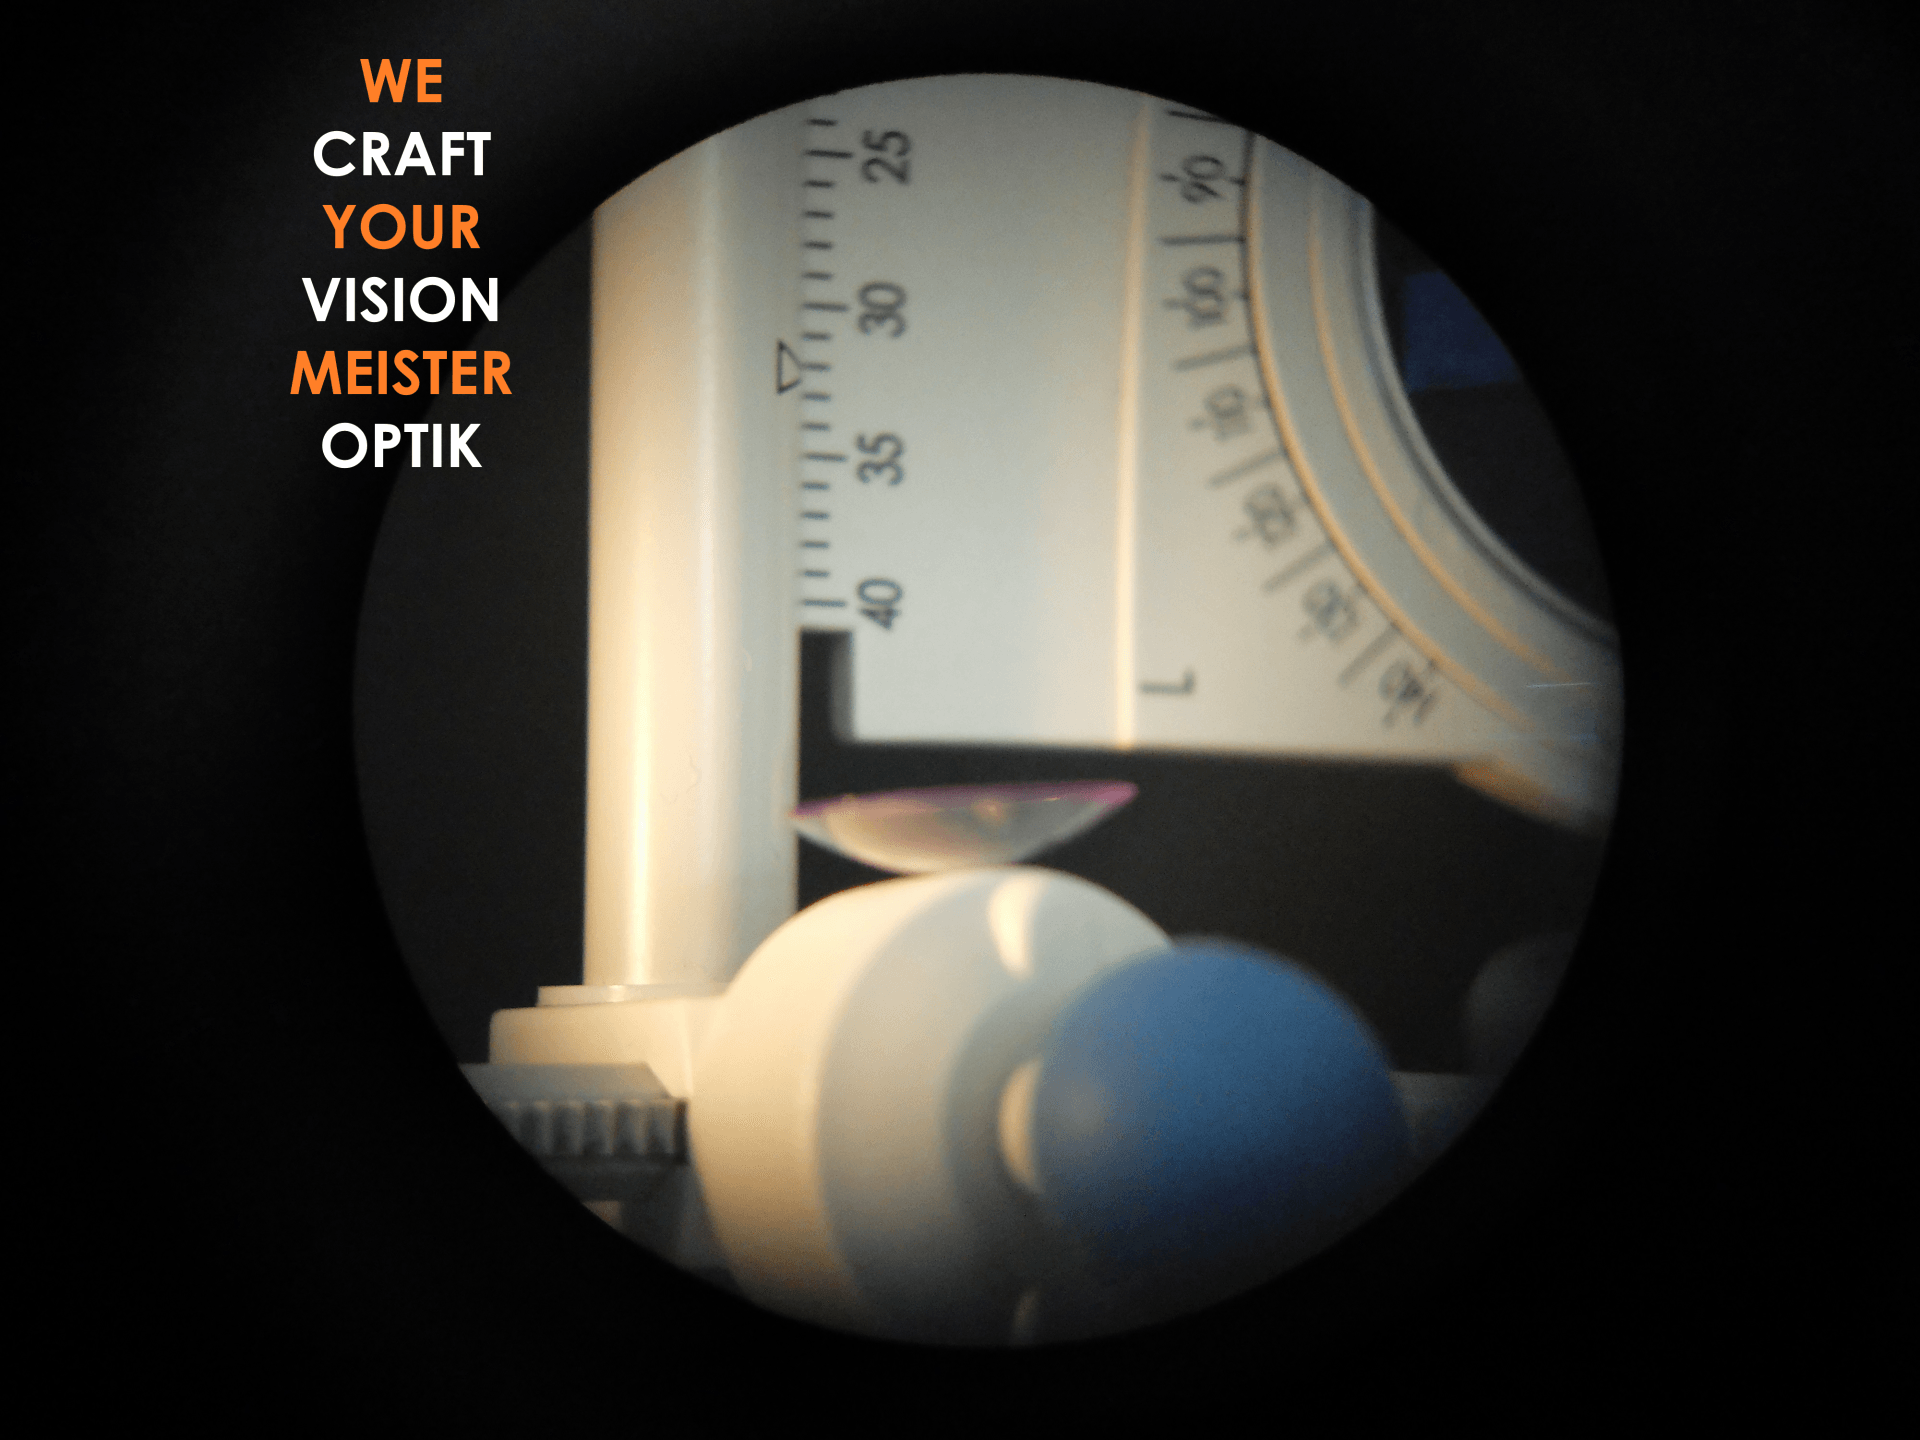 We craft your vision